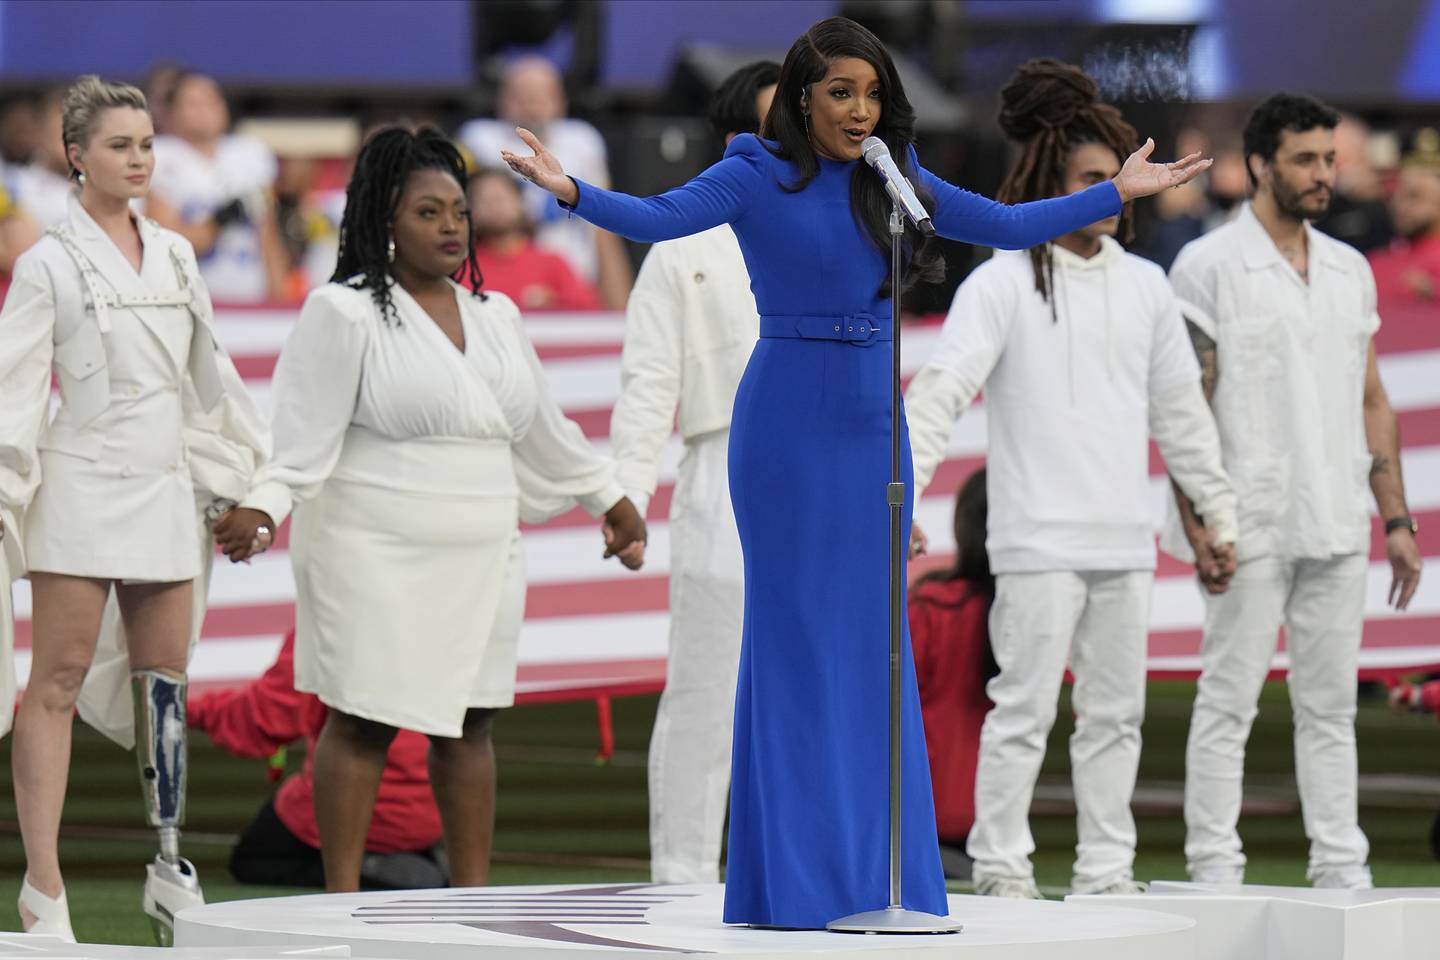 Country music artist Mickey Guyton performs the US national anthem before the NFL Super Bowl 56 football game. AP